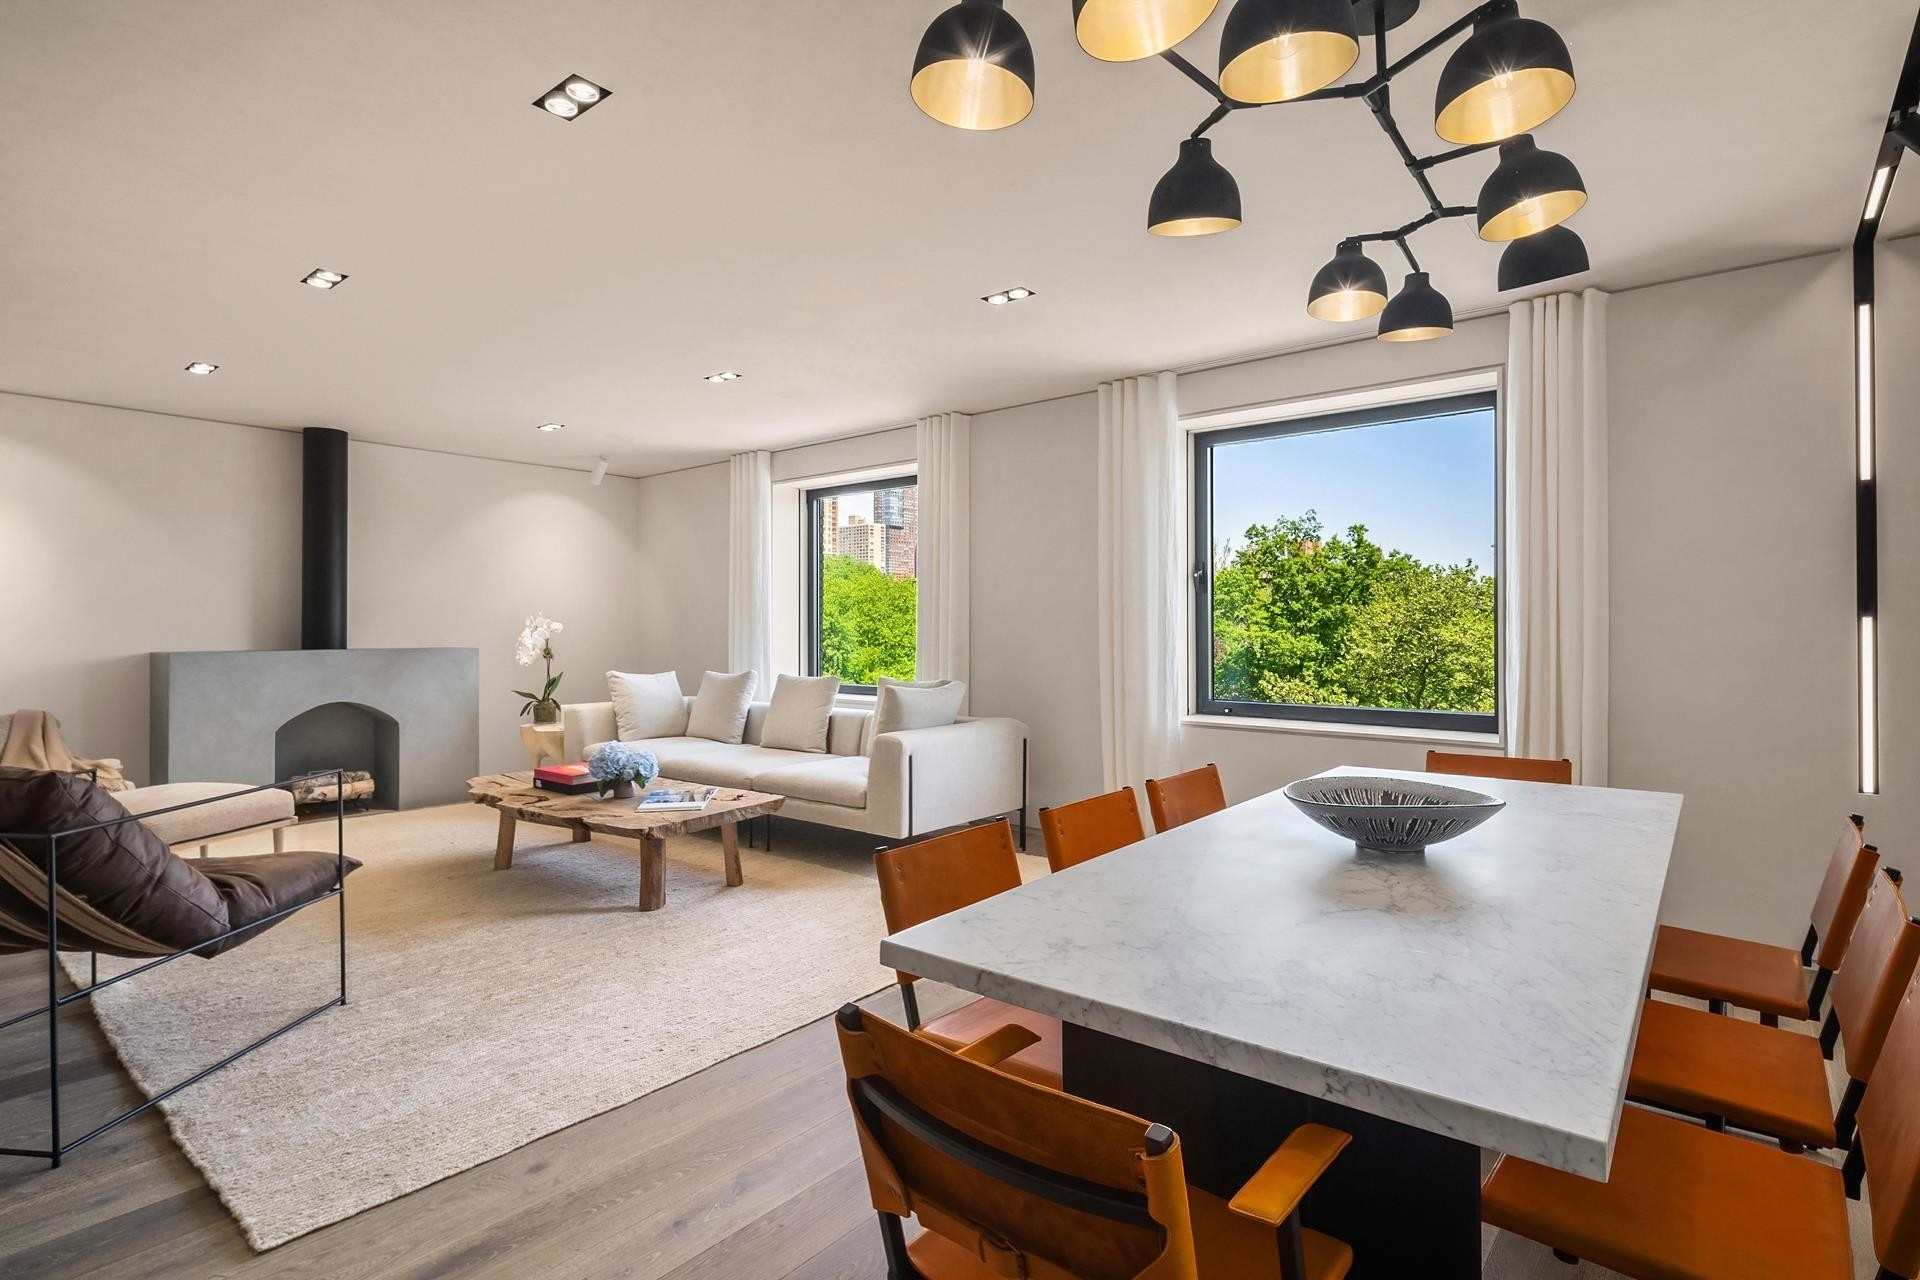 Property at Essex House, 160 CENTRAL PARK S, 615 Central Park South, New York, NY 10019